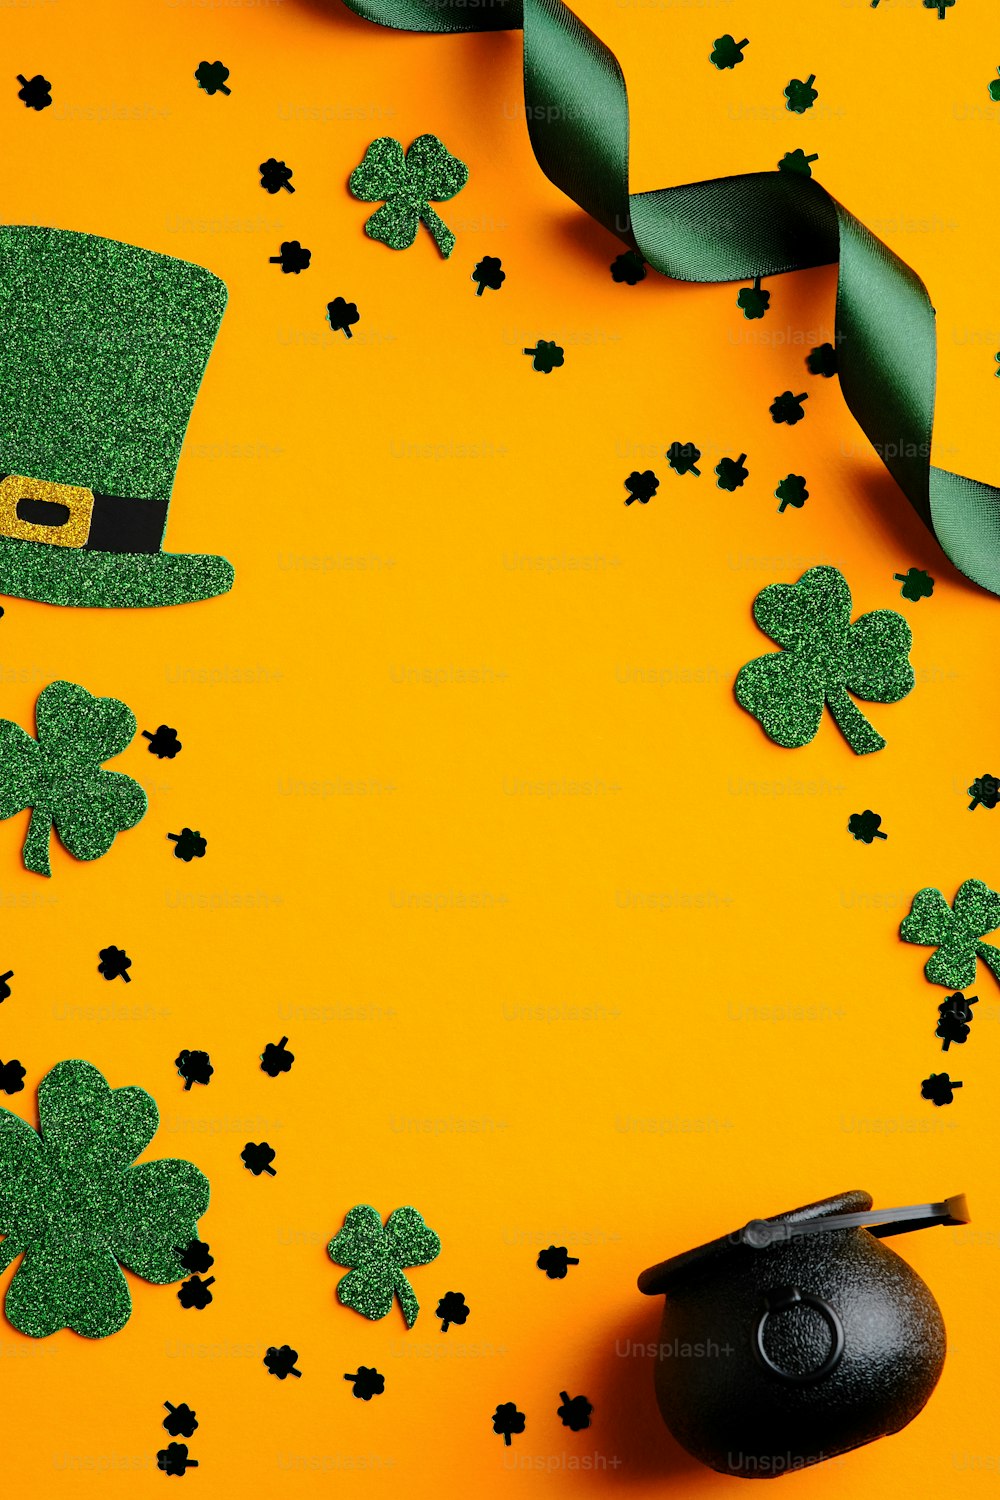 Saint Patrick's day card with green shamrock, leprechauns hat, pot of gold, ribbon and confetti on orange background. Happy St. Patrick's Day vertical banner design.